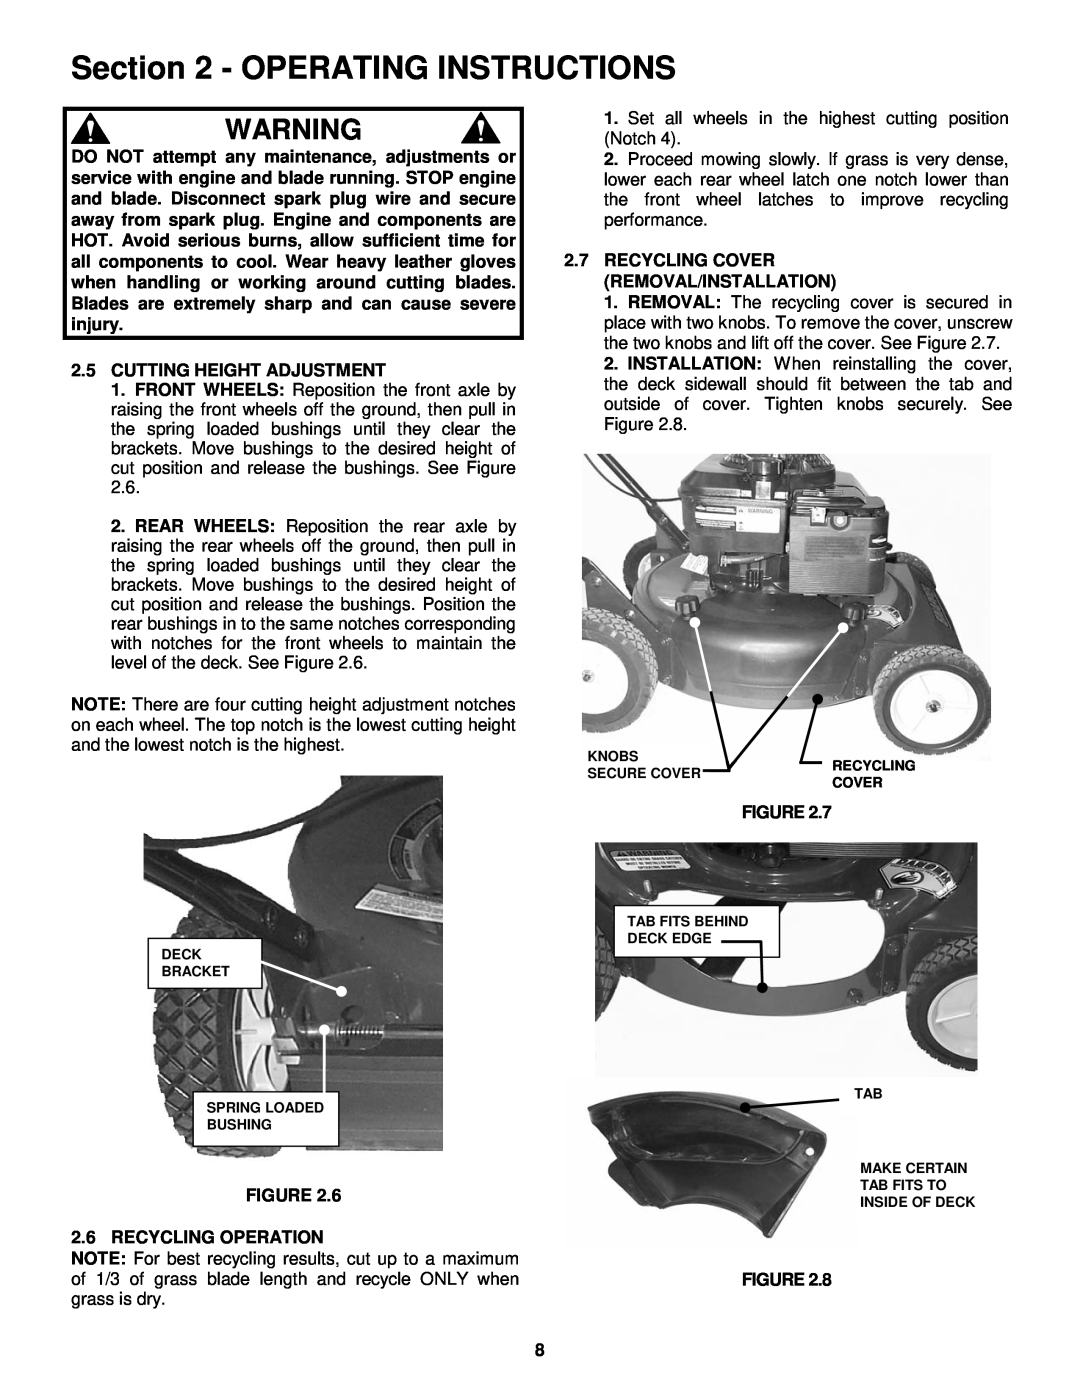 Snapper R195517B Operating Instructions, 2.5CUTTING HEIGHT ADJUSTMENT, 2.7RECYCLING COVER REMOVAL/INSTALLATION 